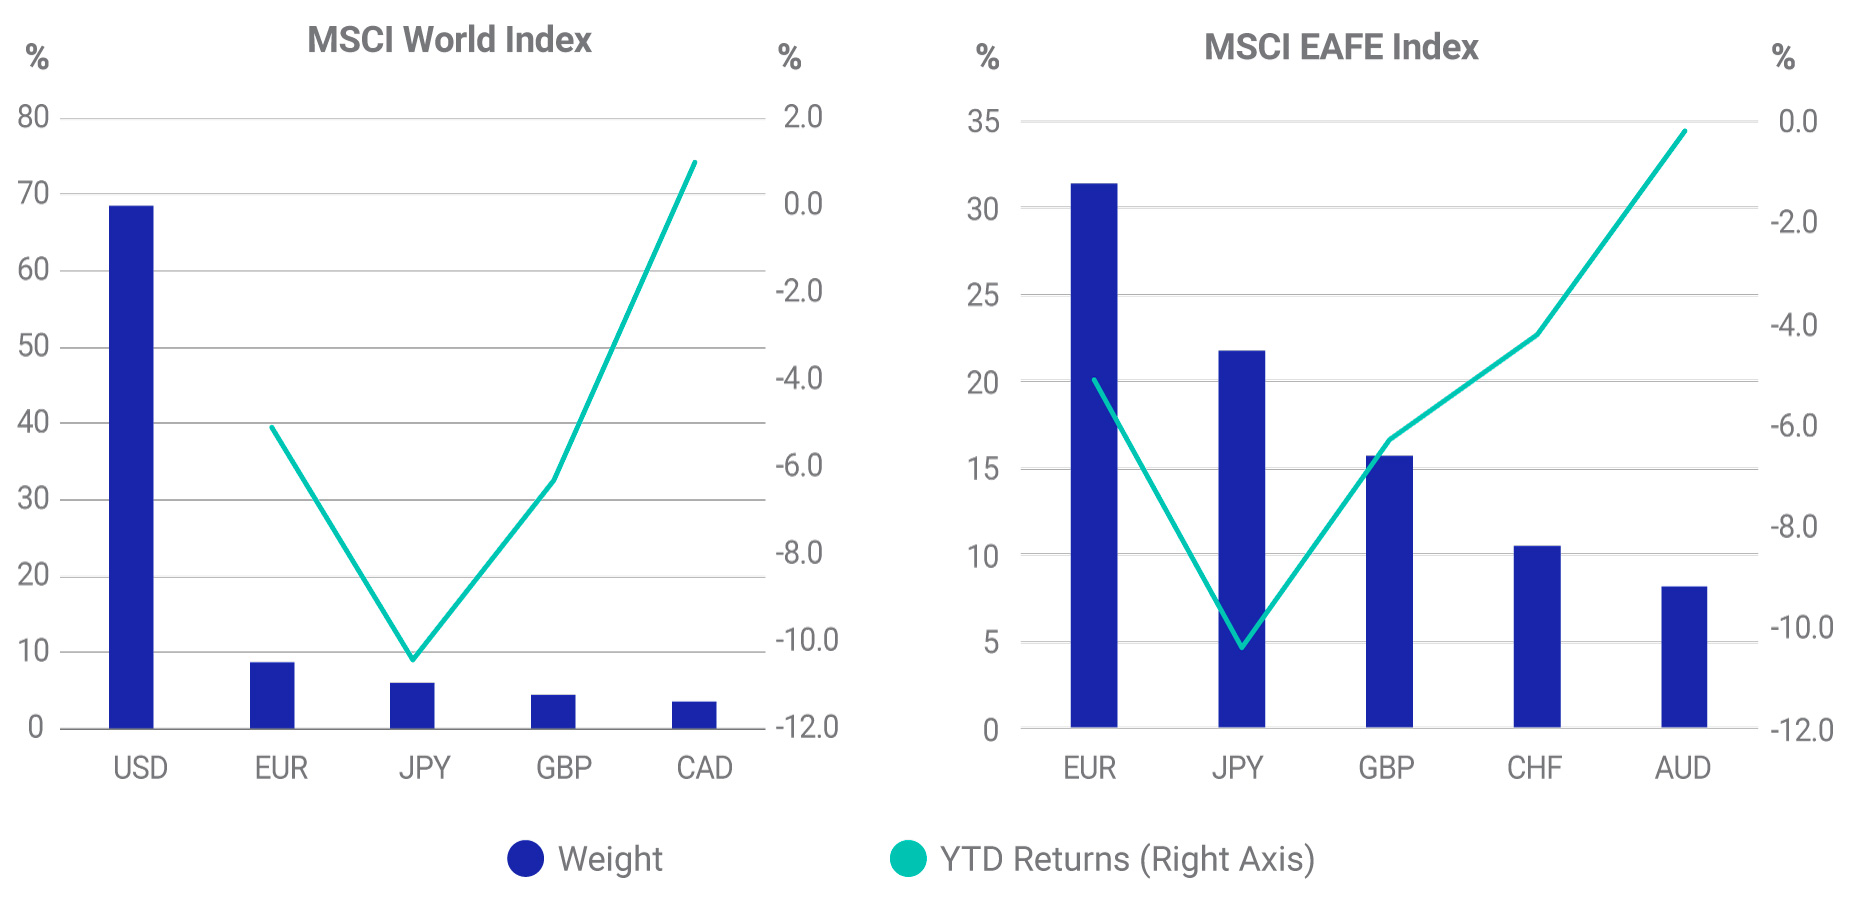 Index currency exposure and returns for MSCI World Index and MSCI EAFE Index.